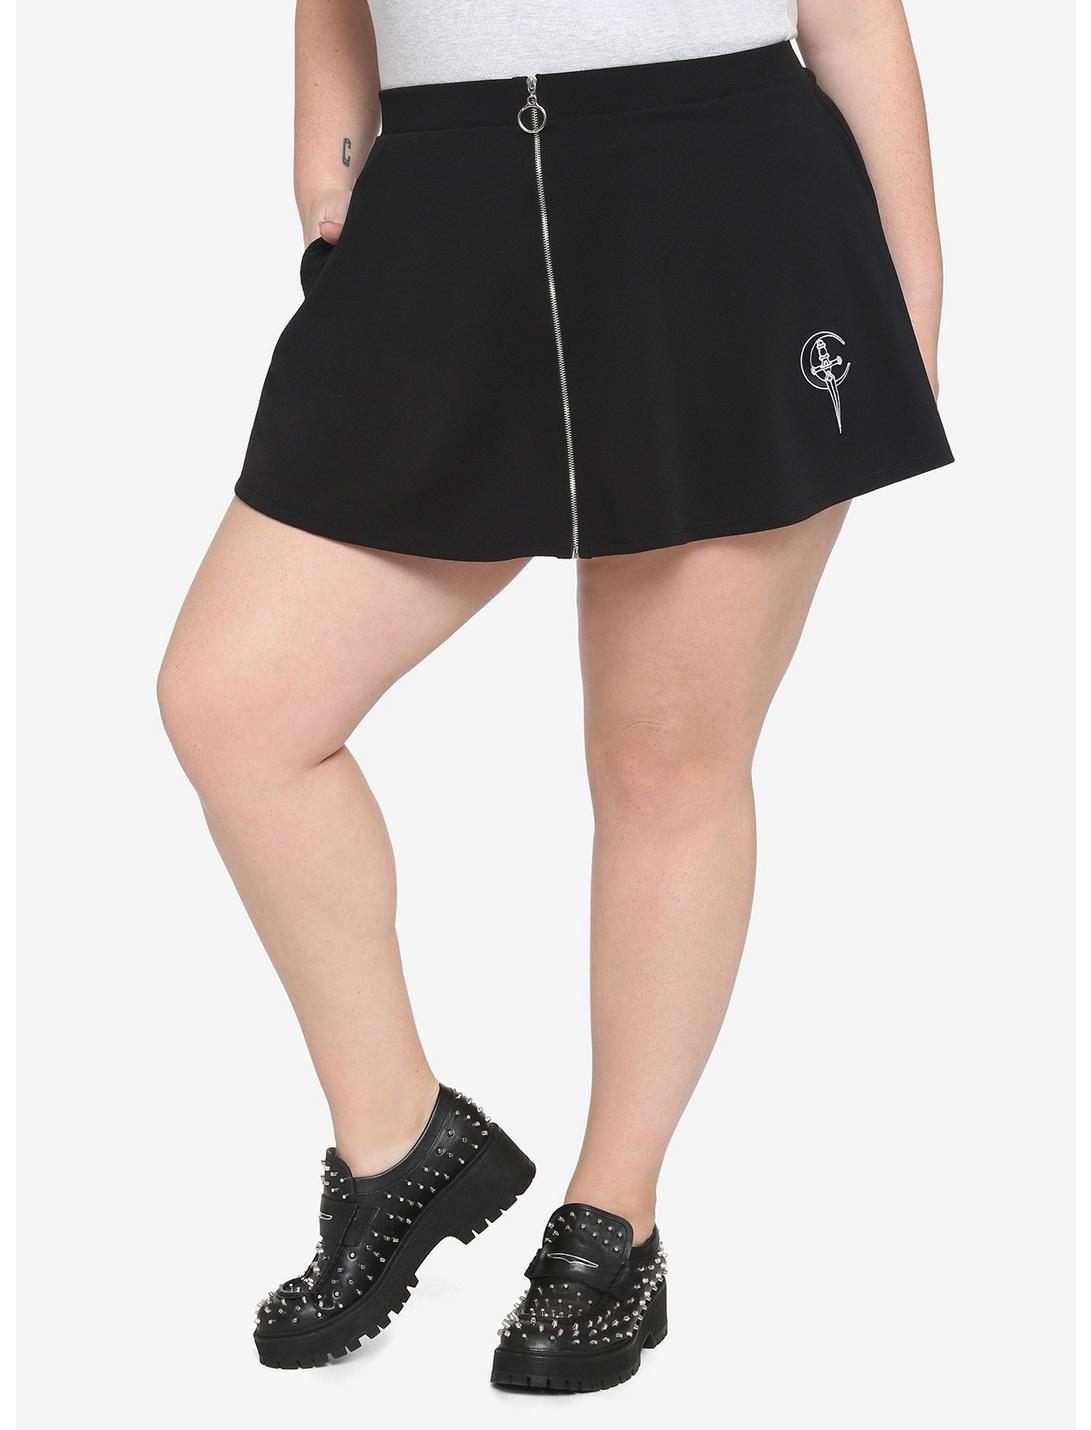 Moon & Sword Patch O-Ring Skirt Plus Size, BLACK, hi-res